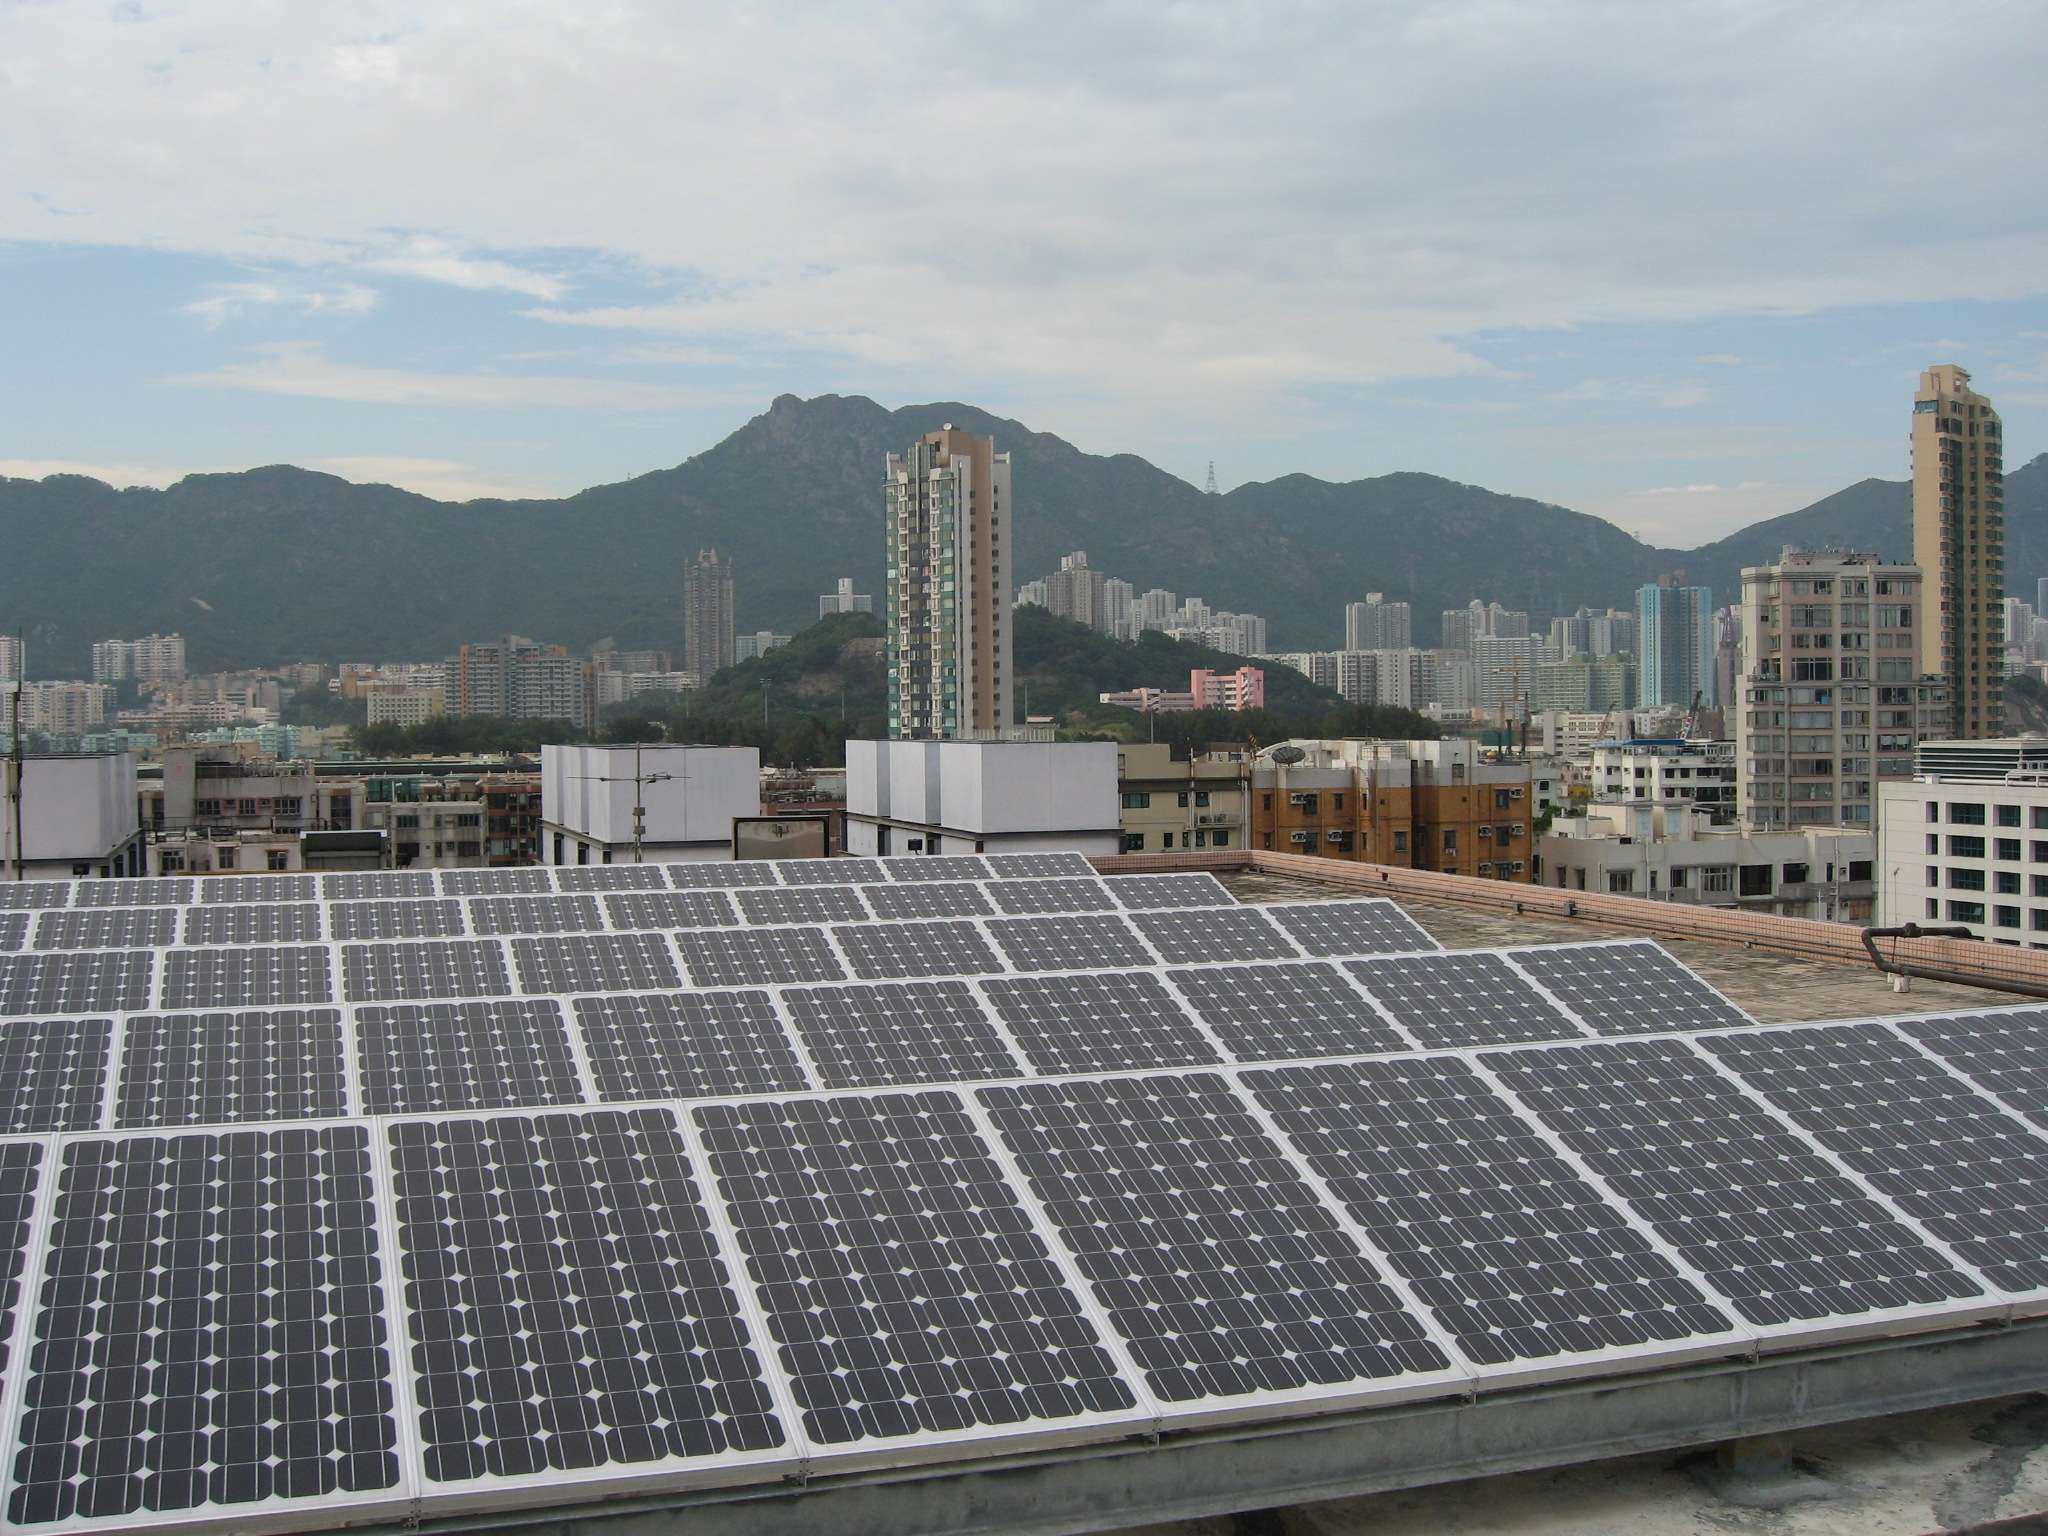 Solar panels on the roof of a Kowloon Hospital building. Decarbonising the city’s healthcare system would align with the government’s sustainability goals and safeguard public health and well-being. Photo: SCMP